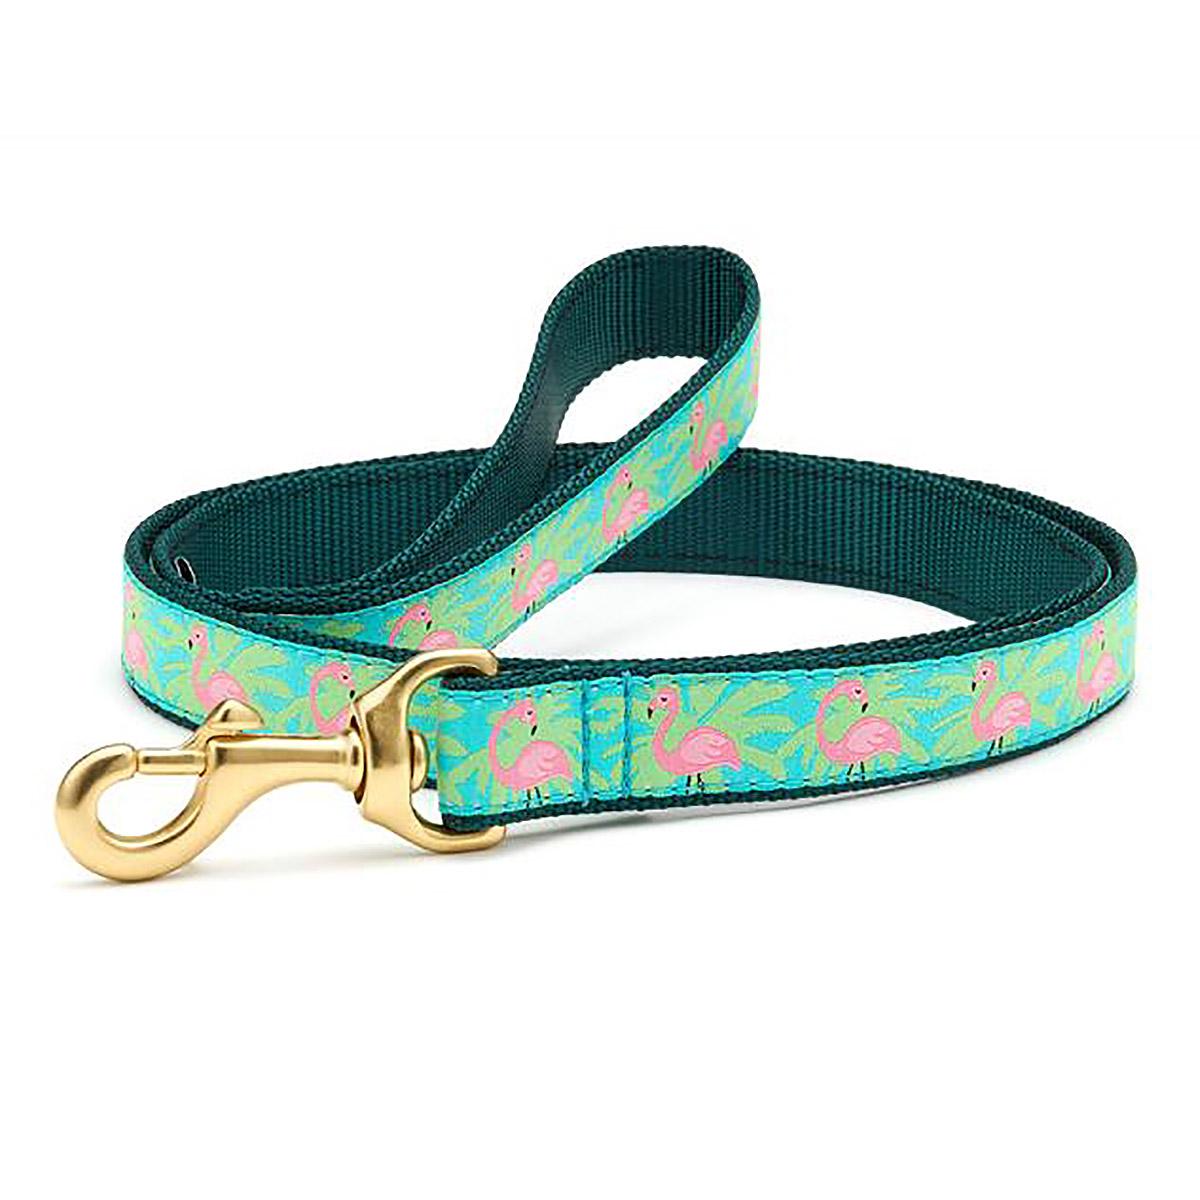 Flamingo Dog Leash by Up Country